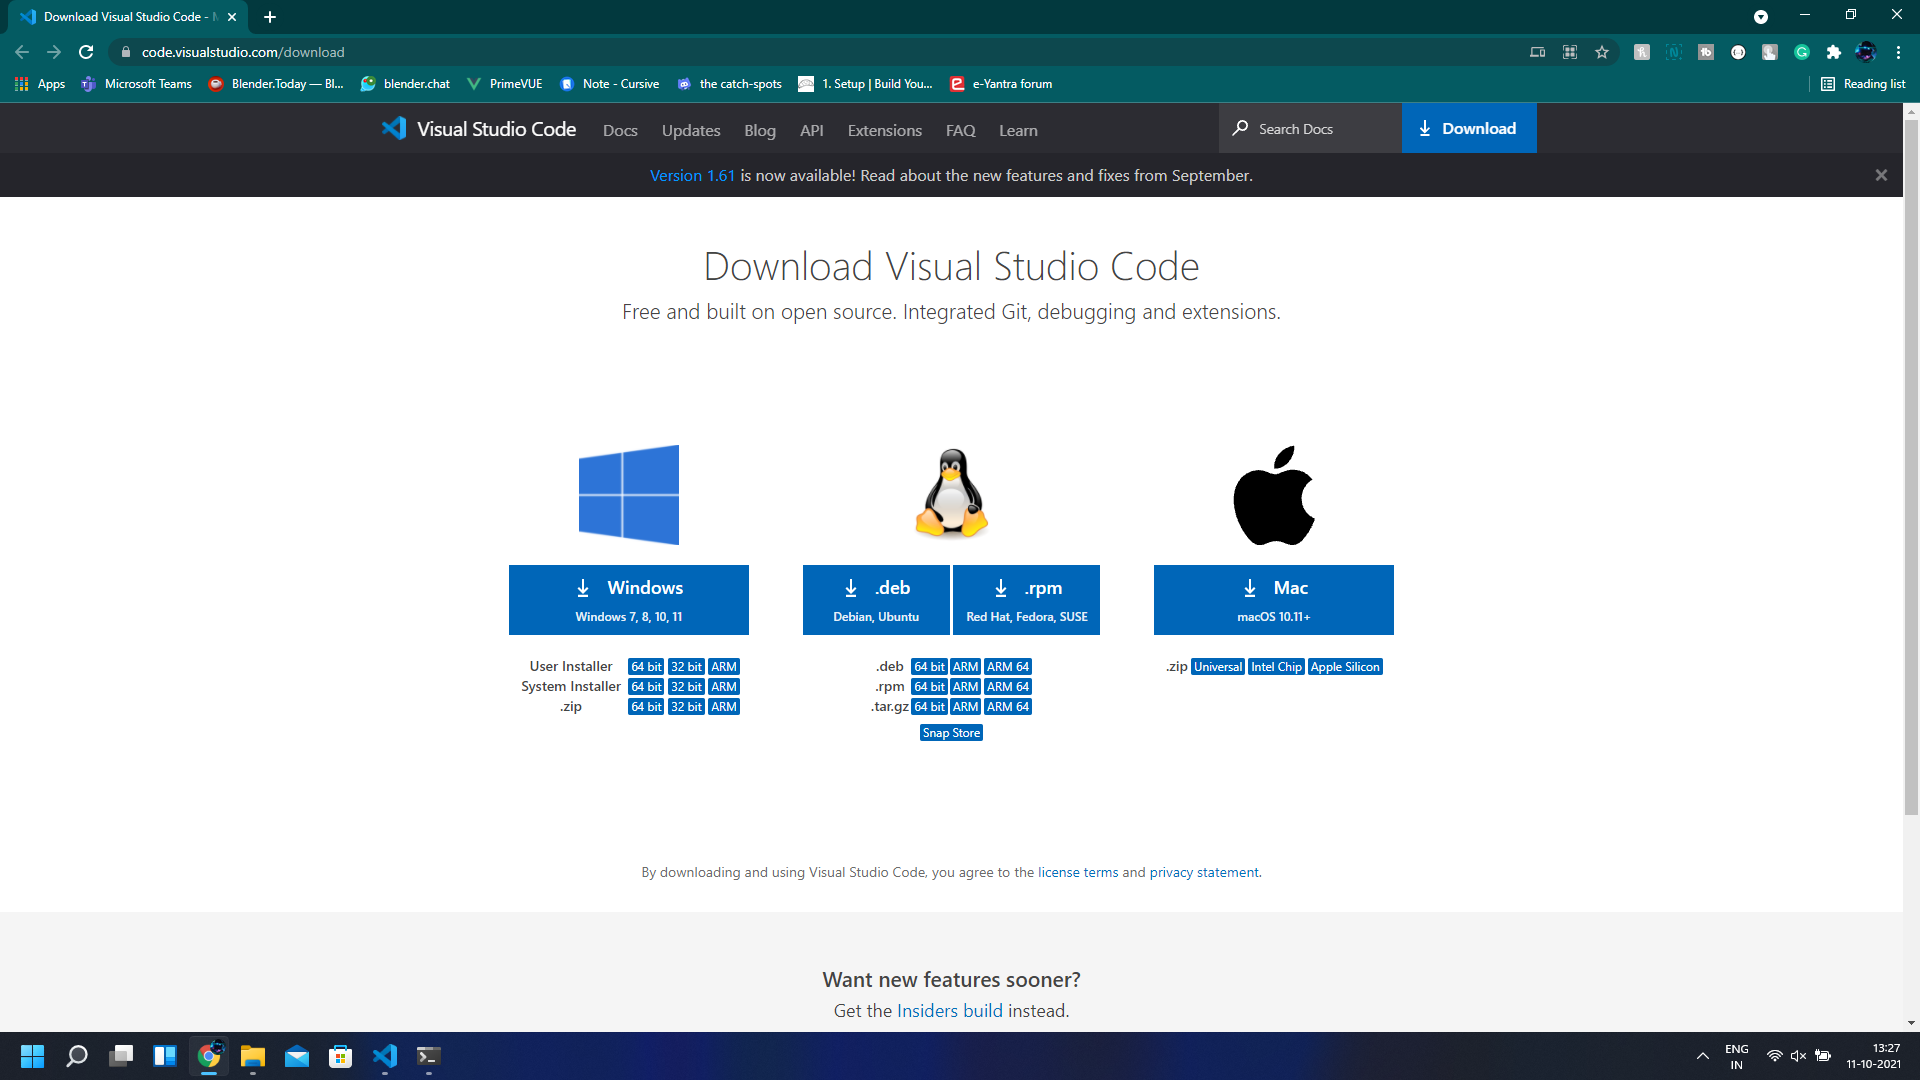 vscode download page